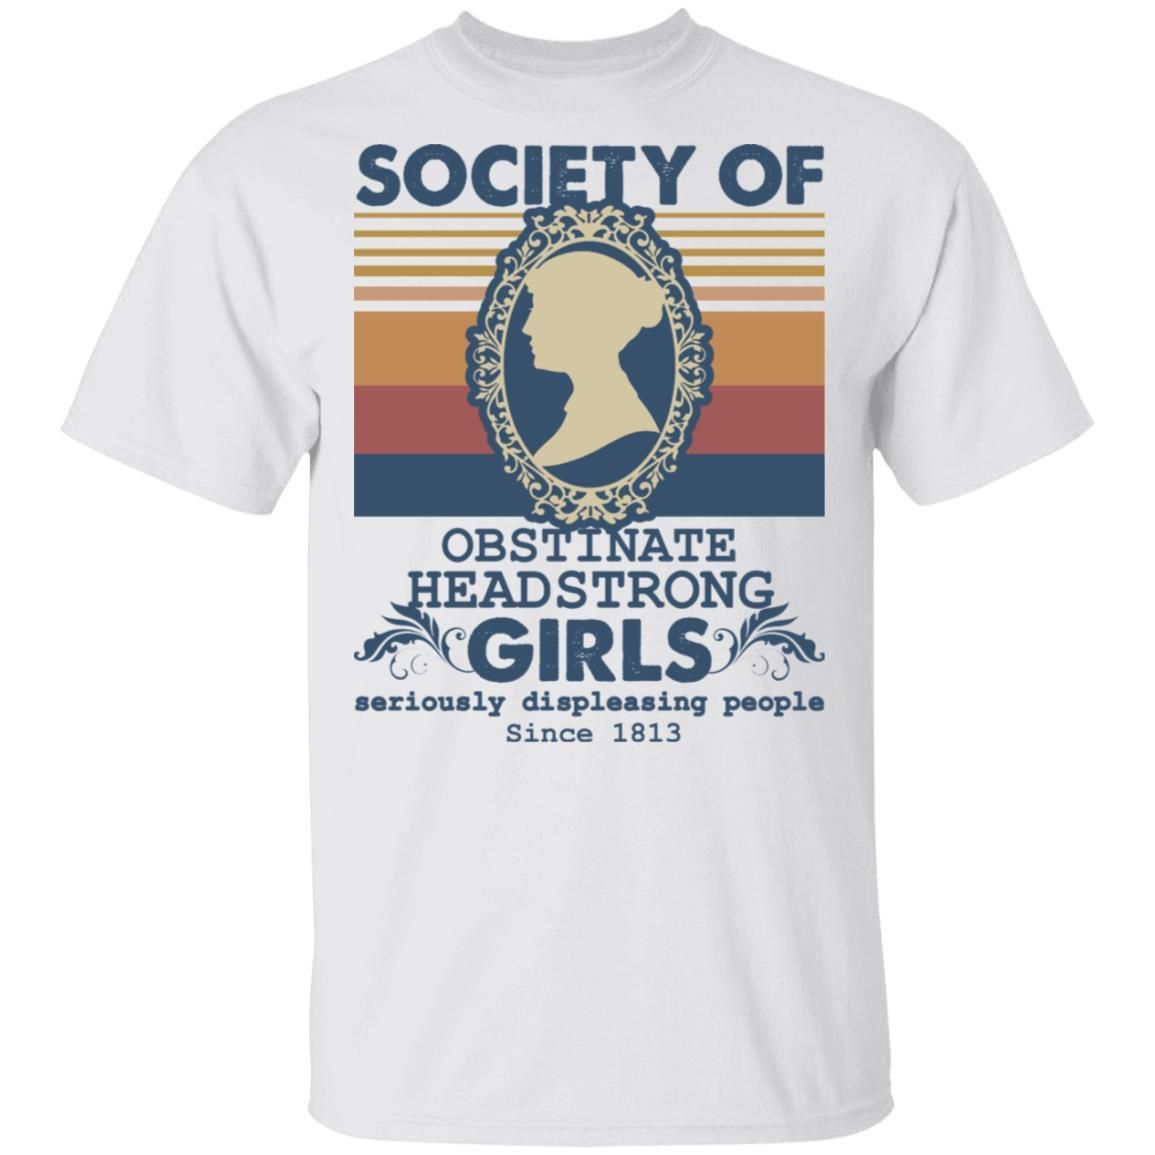 Society Of Obstinate Headstrong Girls Seriously Displeasing People shirts